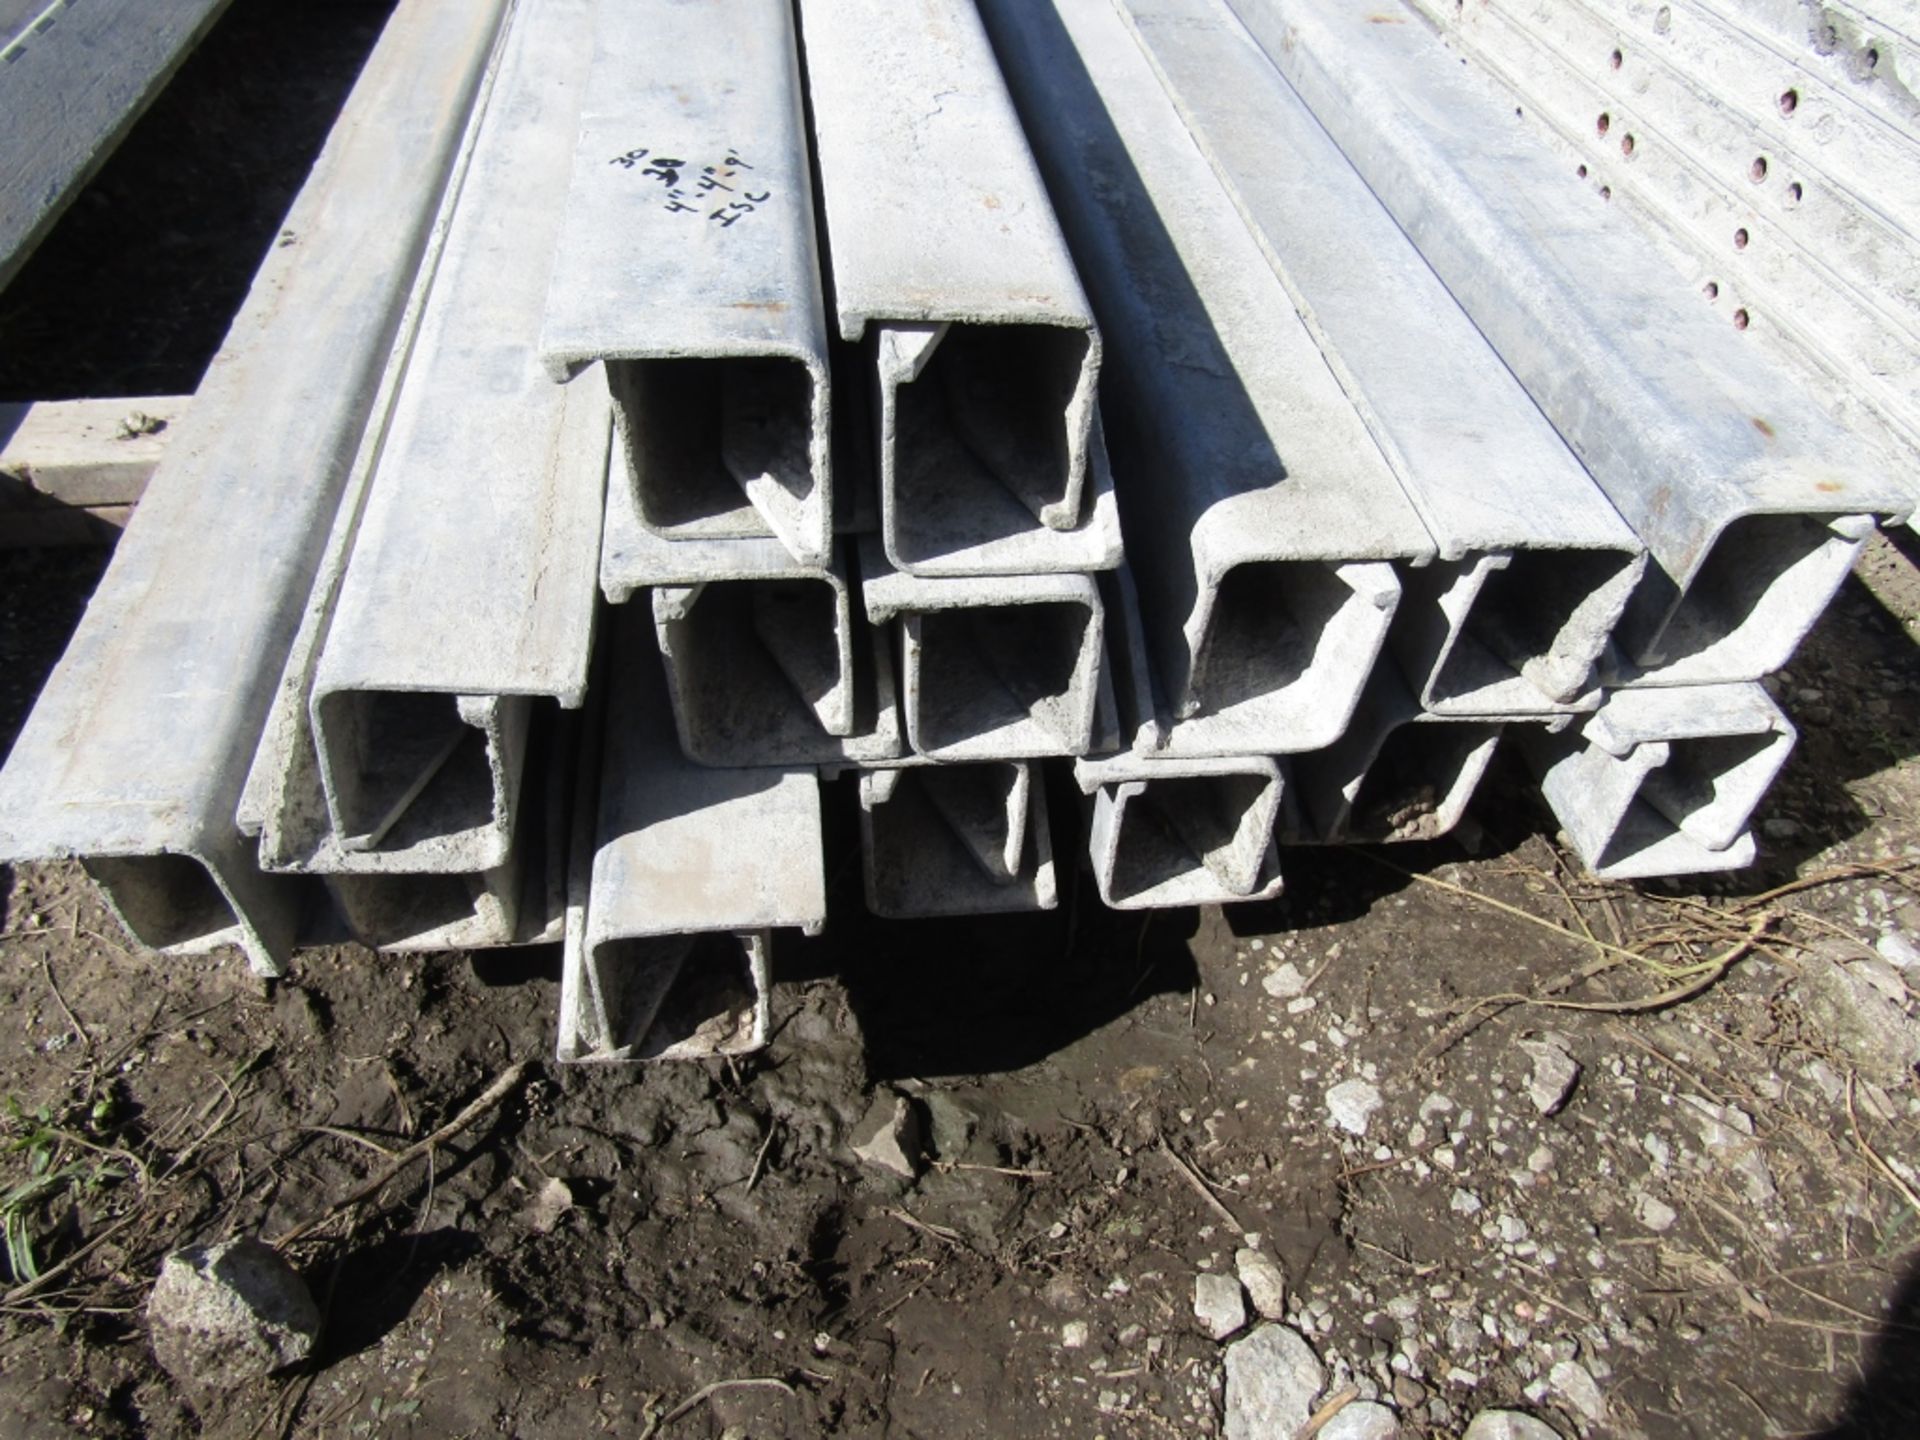 (30)4"x4" x 9' Nominal ISC Wall Ties Concrete Form, Smooth, 6-12 Hole Pattern, Triple Punch, Located - Image 4 of 4